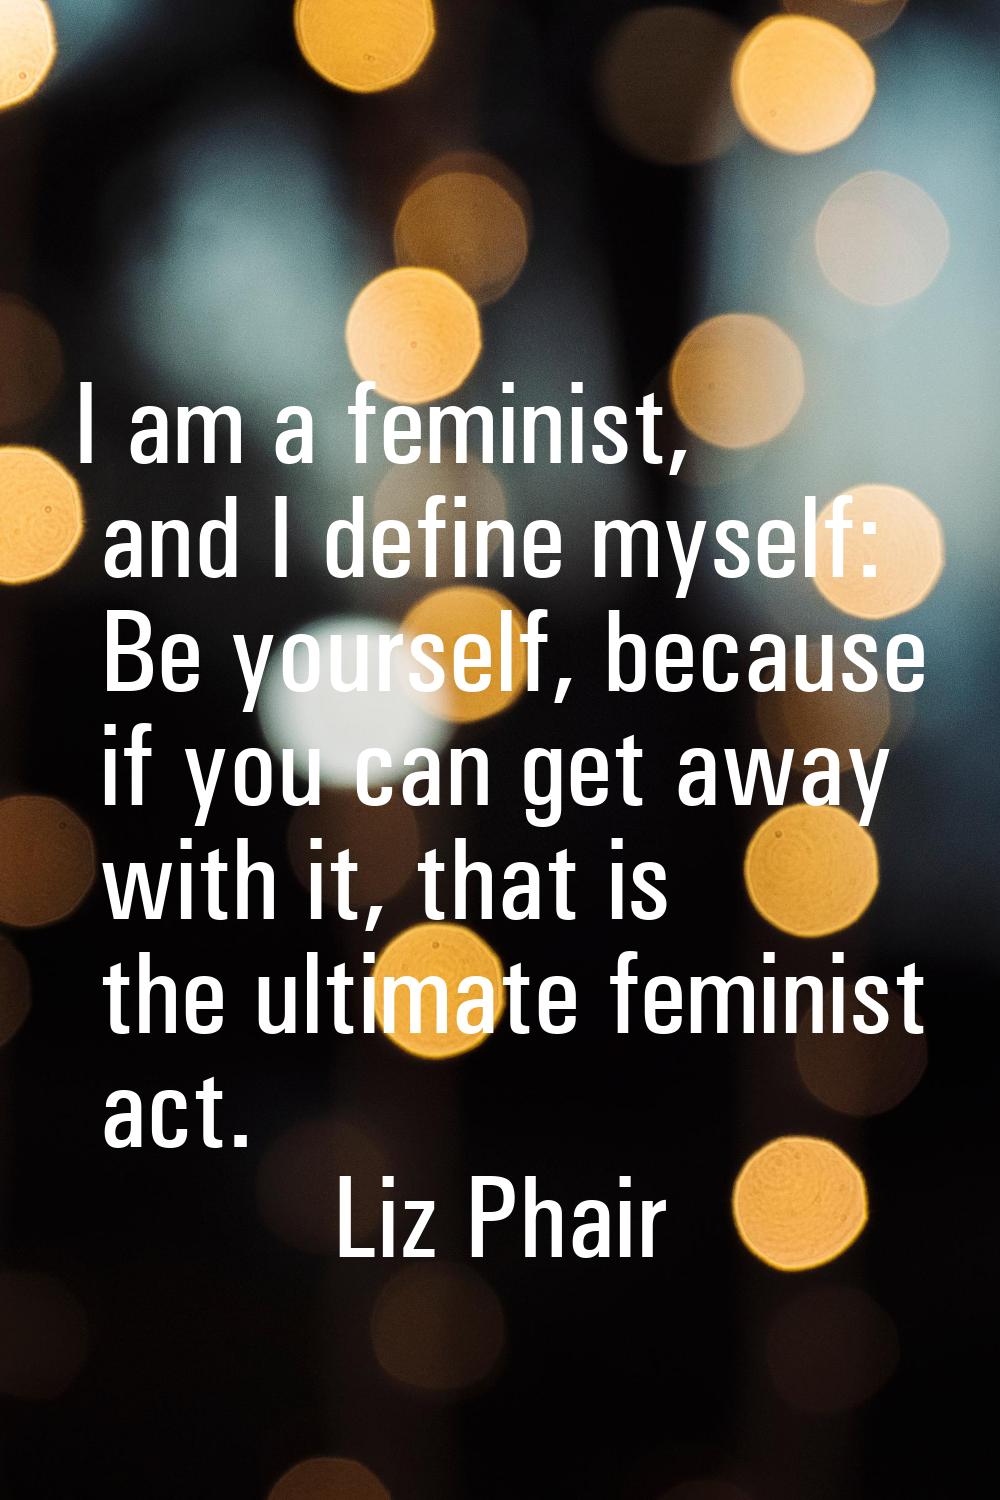 I am a feminist, and I define myself: Be yourself, because if you can get away with it, that is the